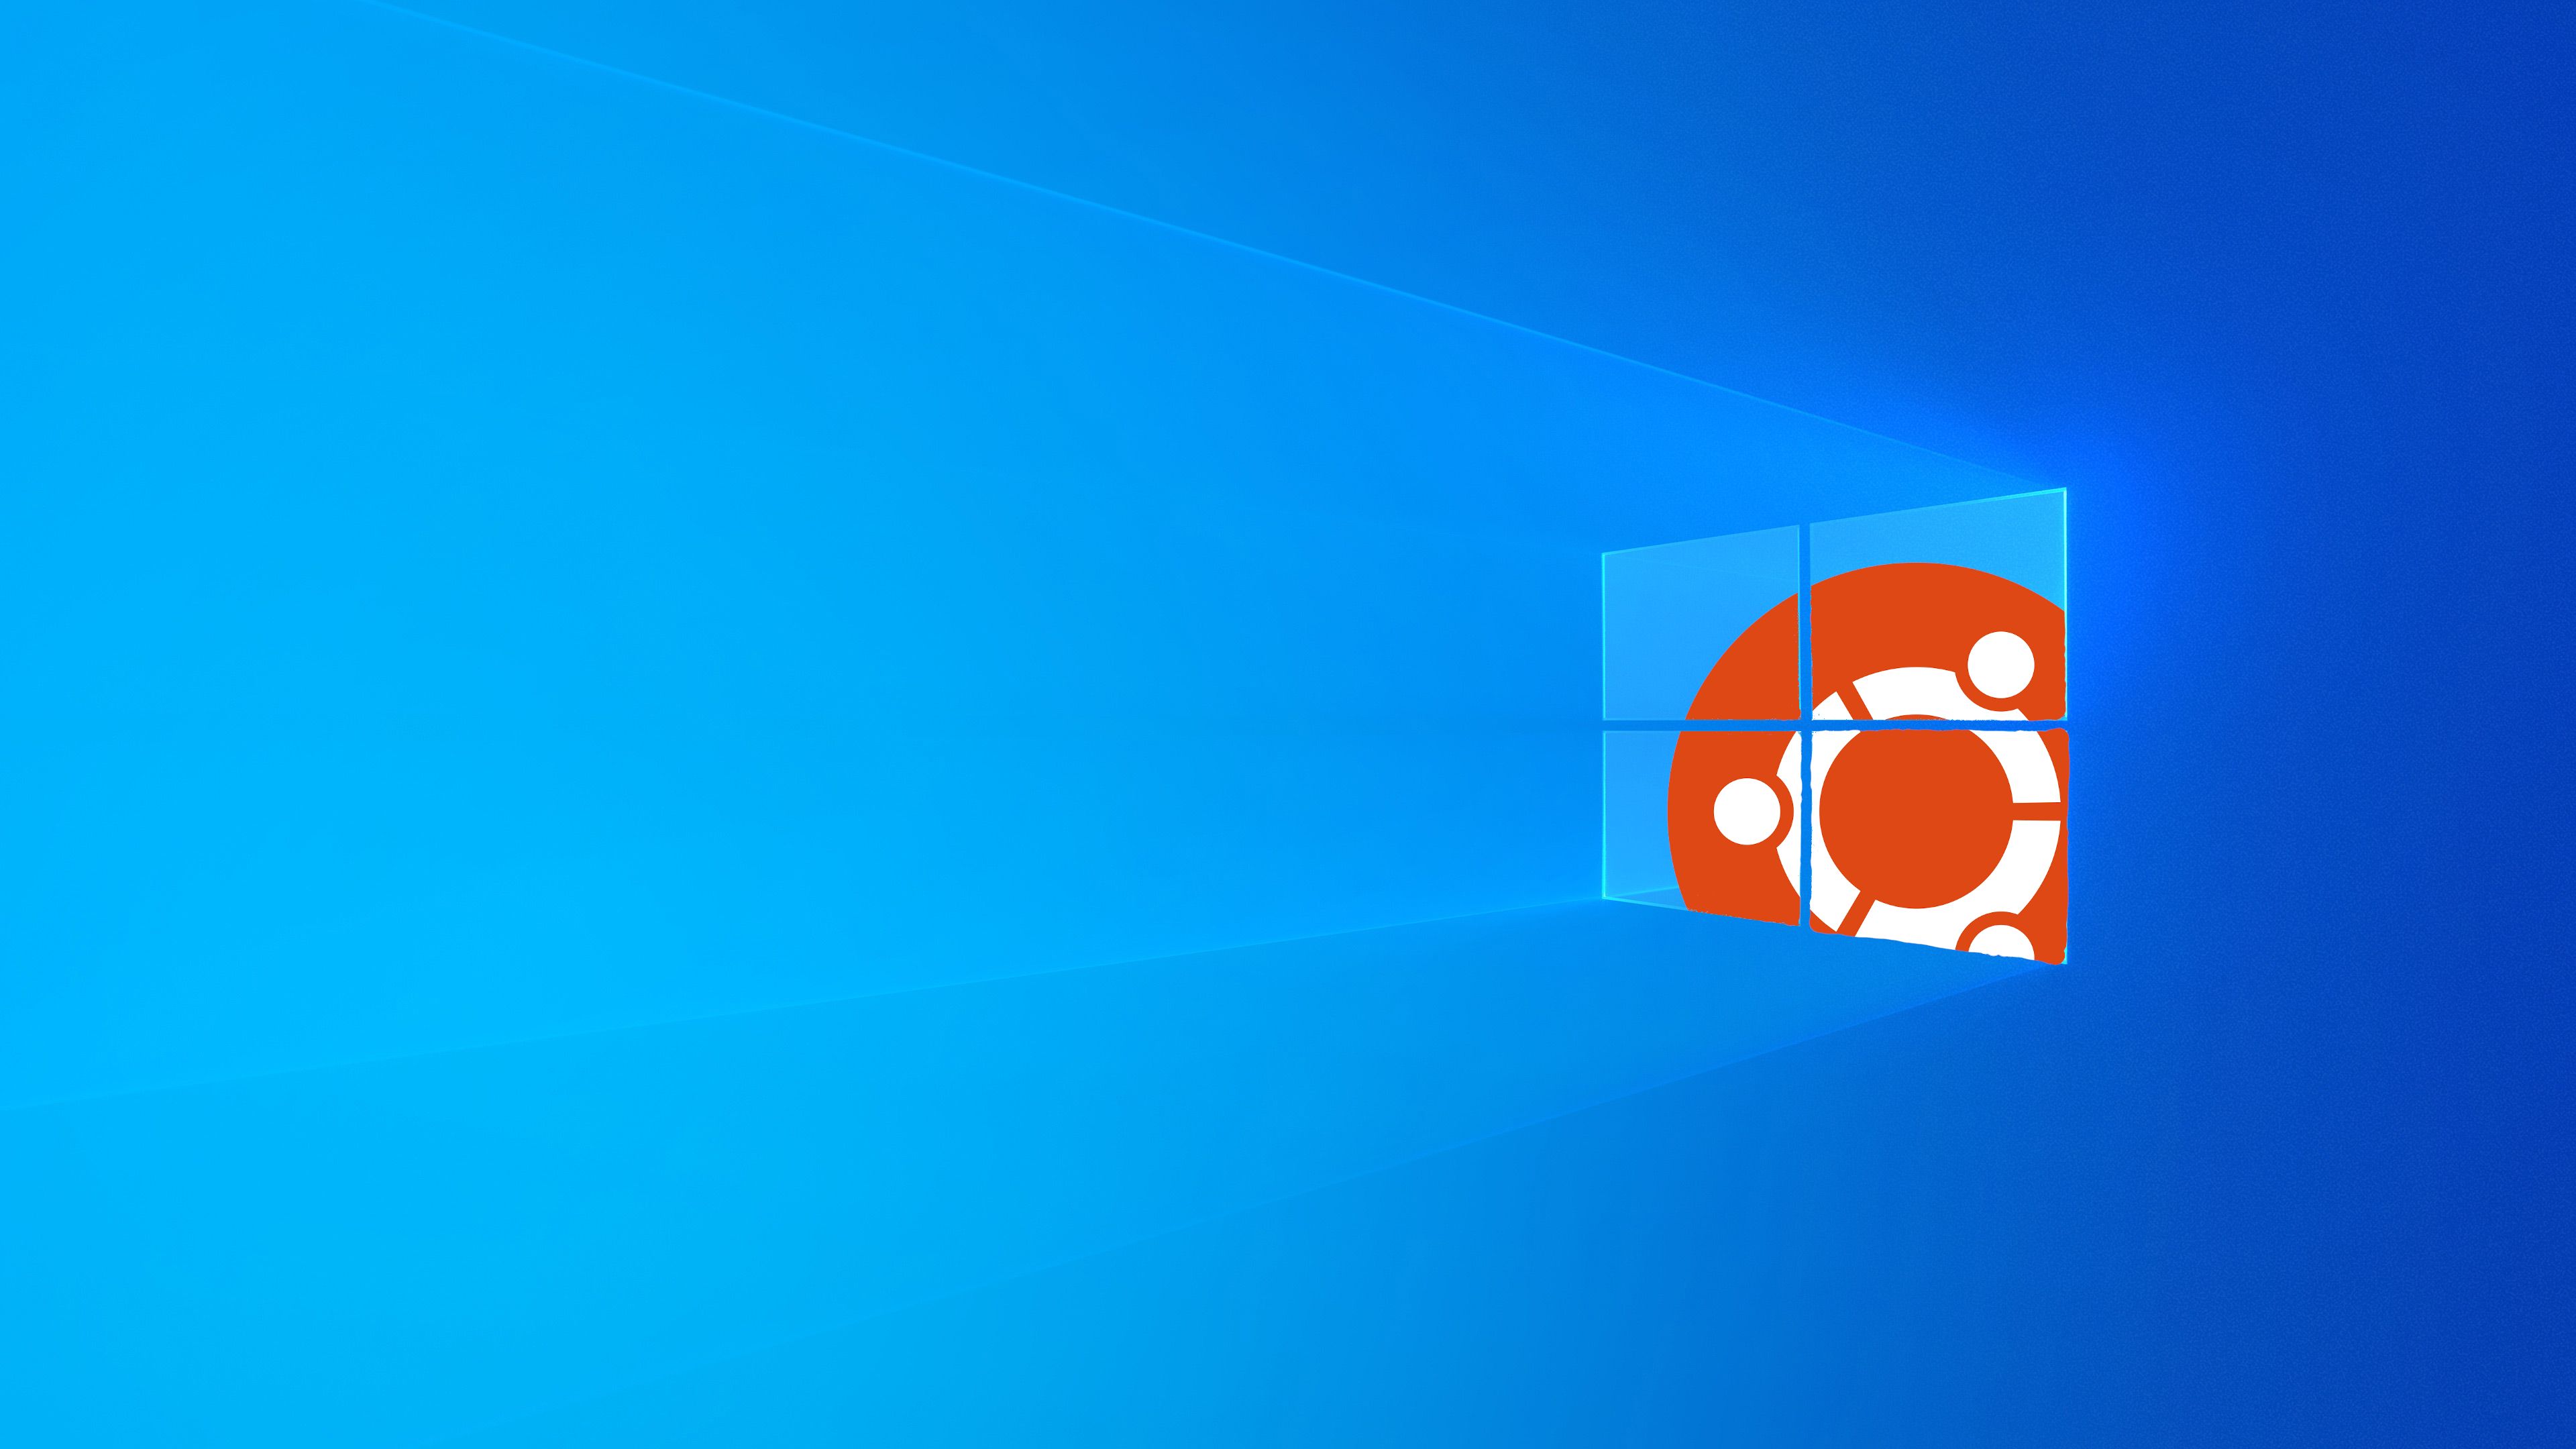 Made a wallpaper for people who still have windows for games. (4k feel free to use)